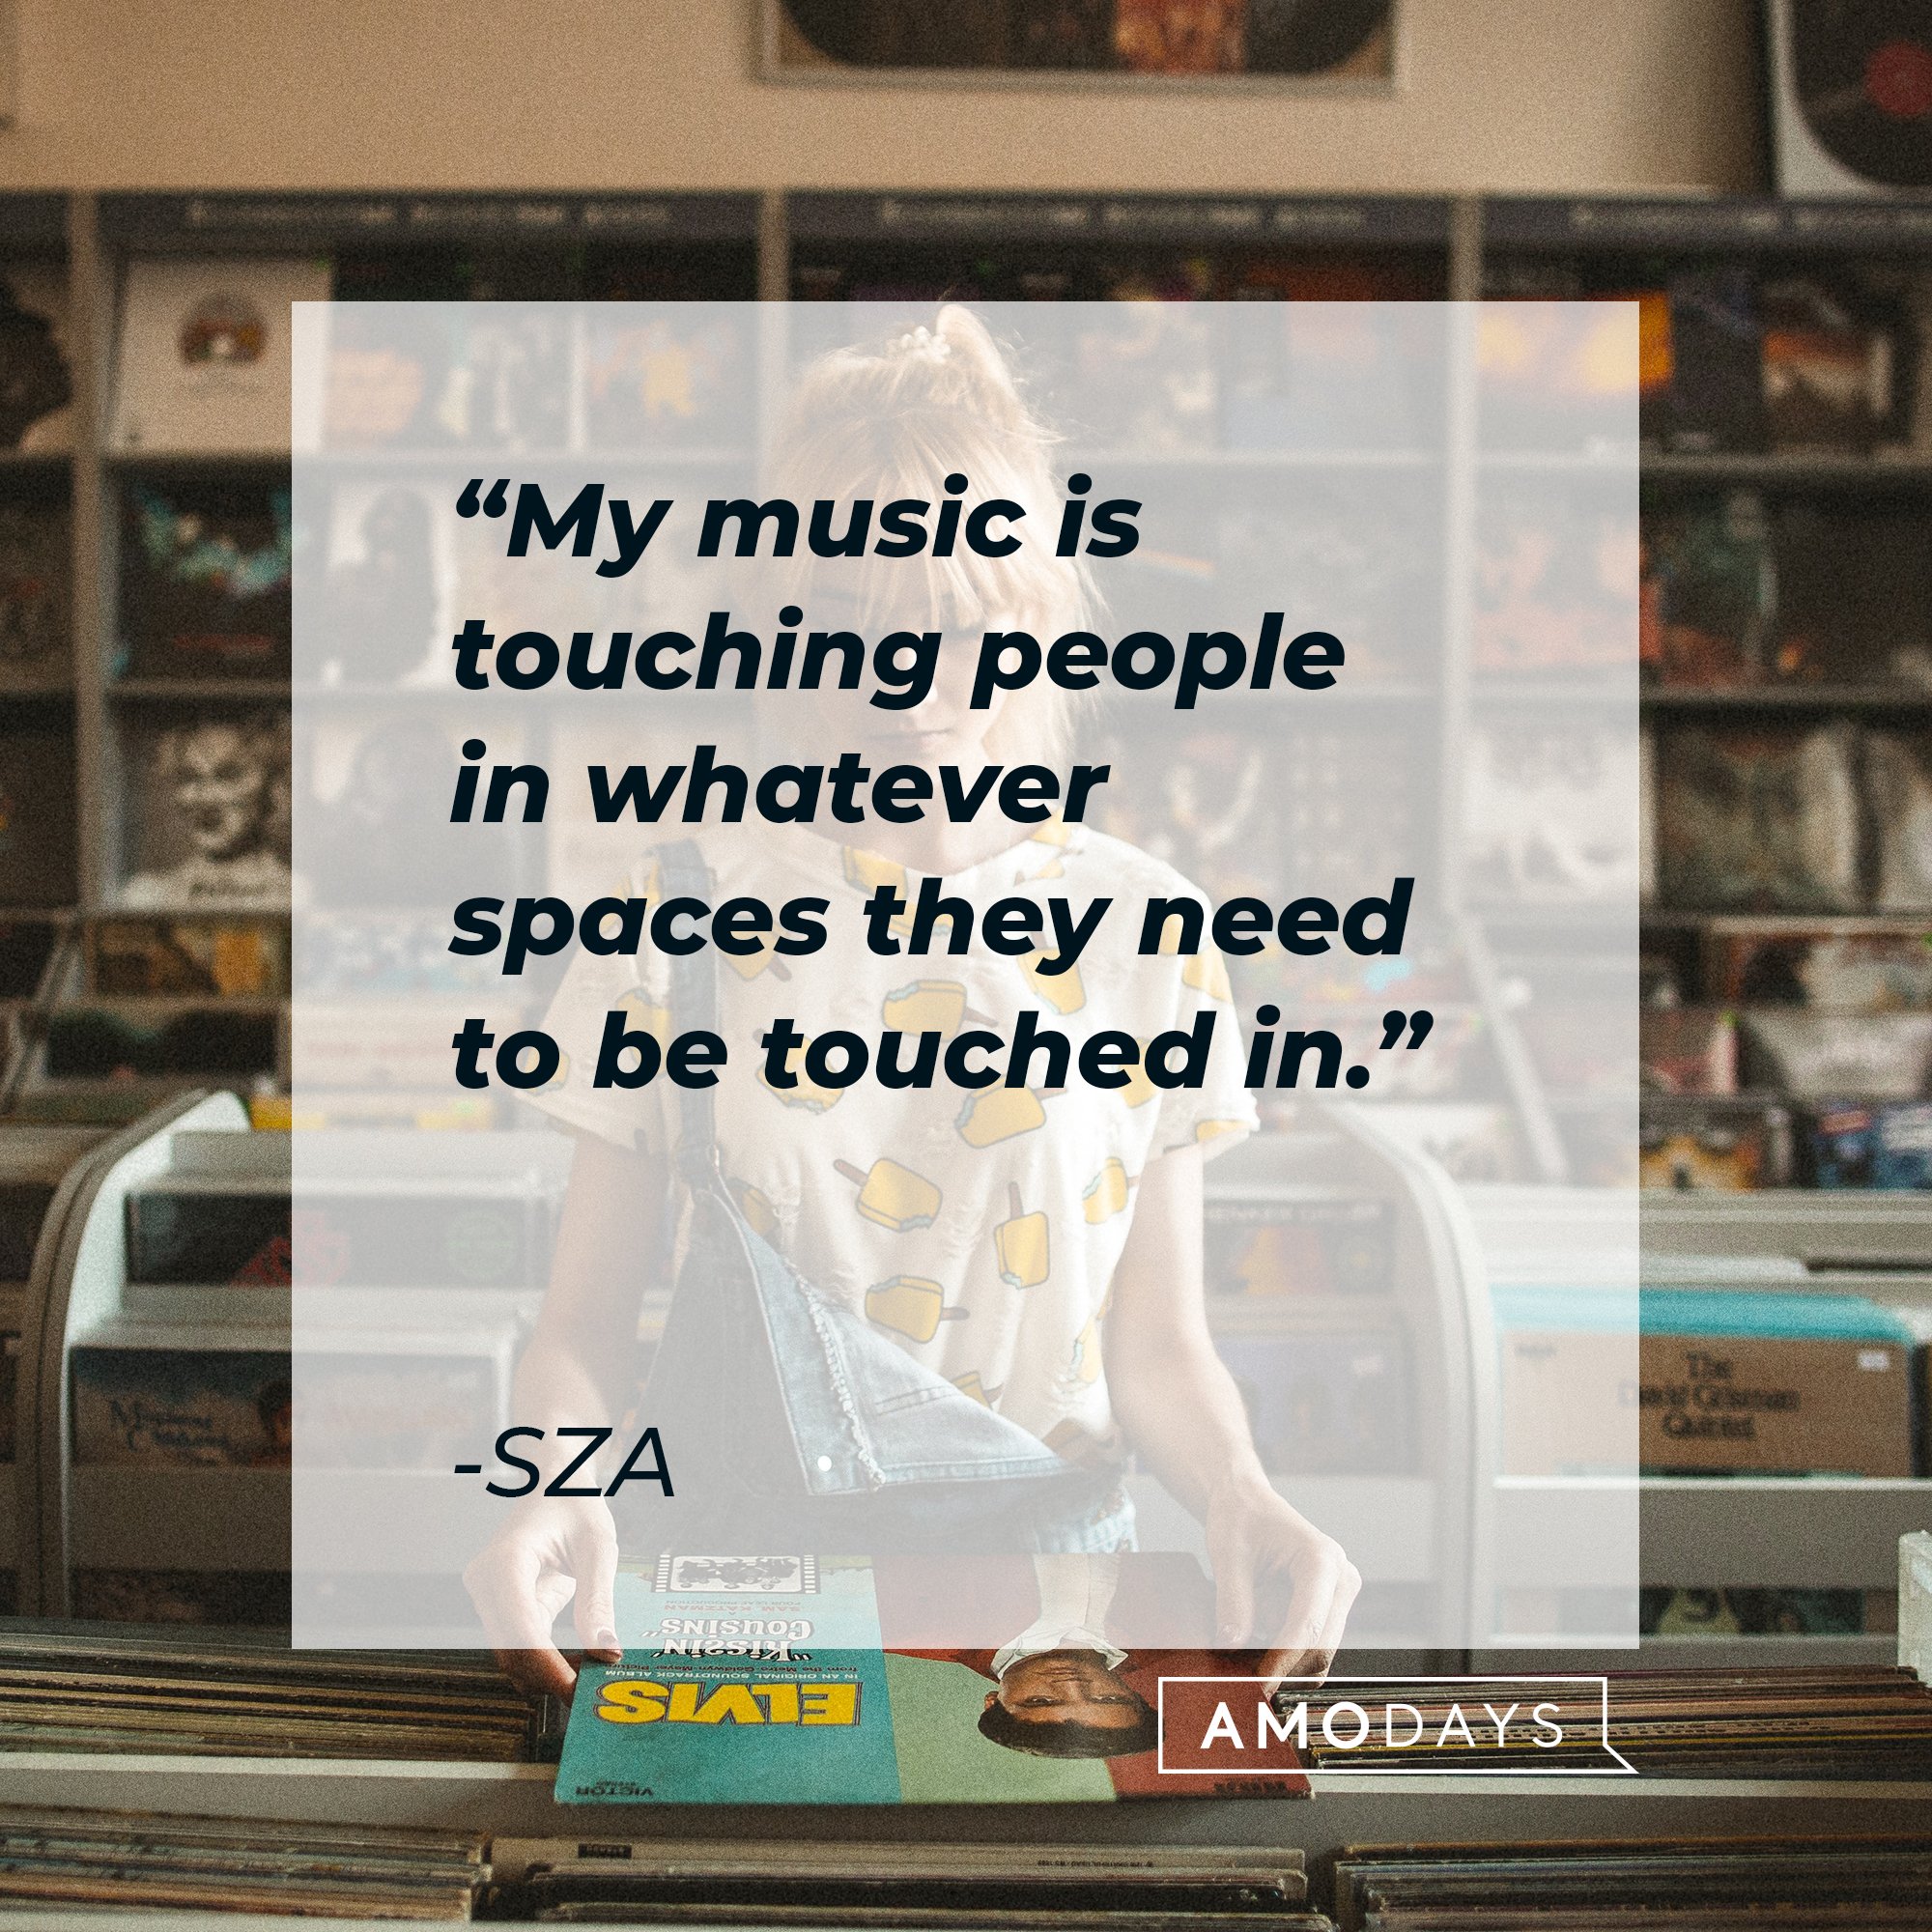 SZA's quote: "My music is touching people in whatever spaces they need to be touched in." | Image: AmoDays